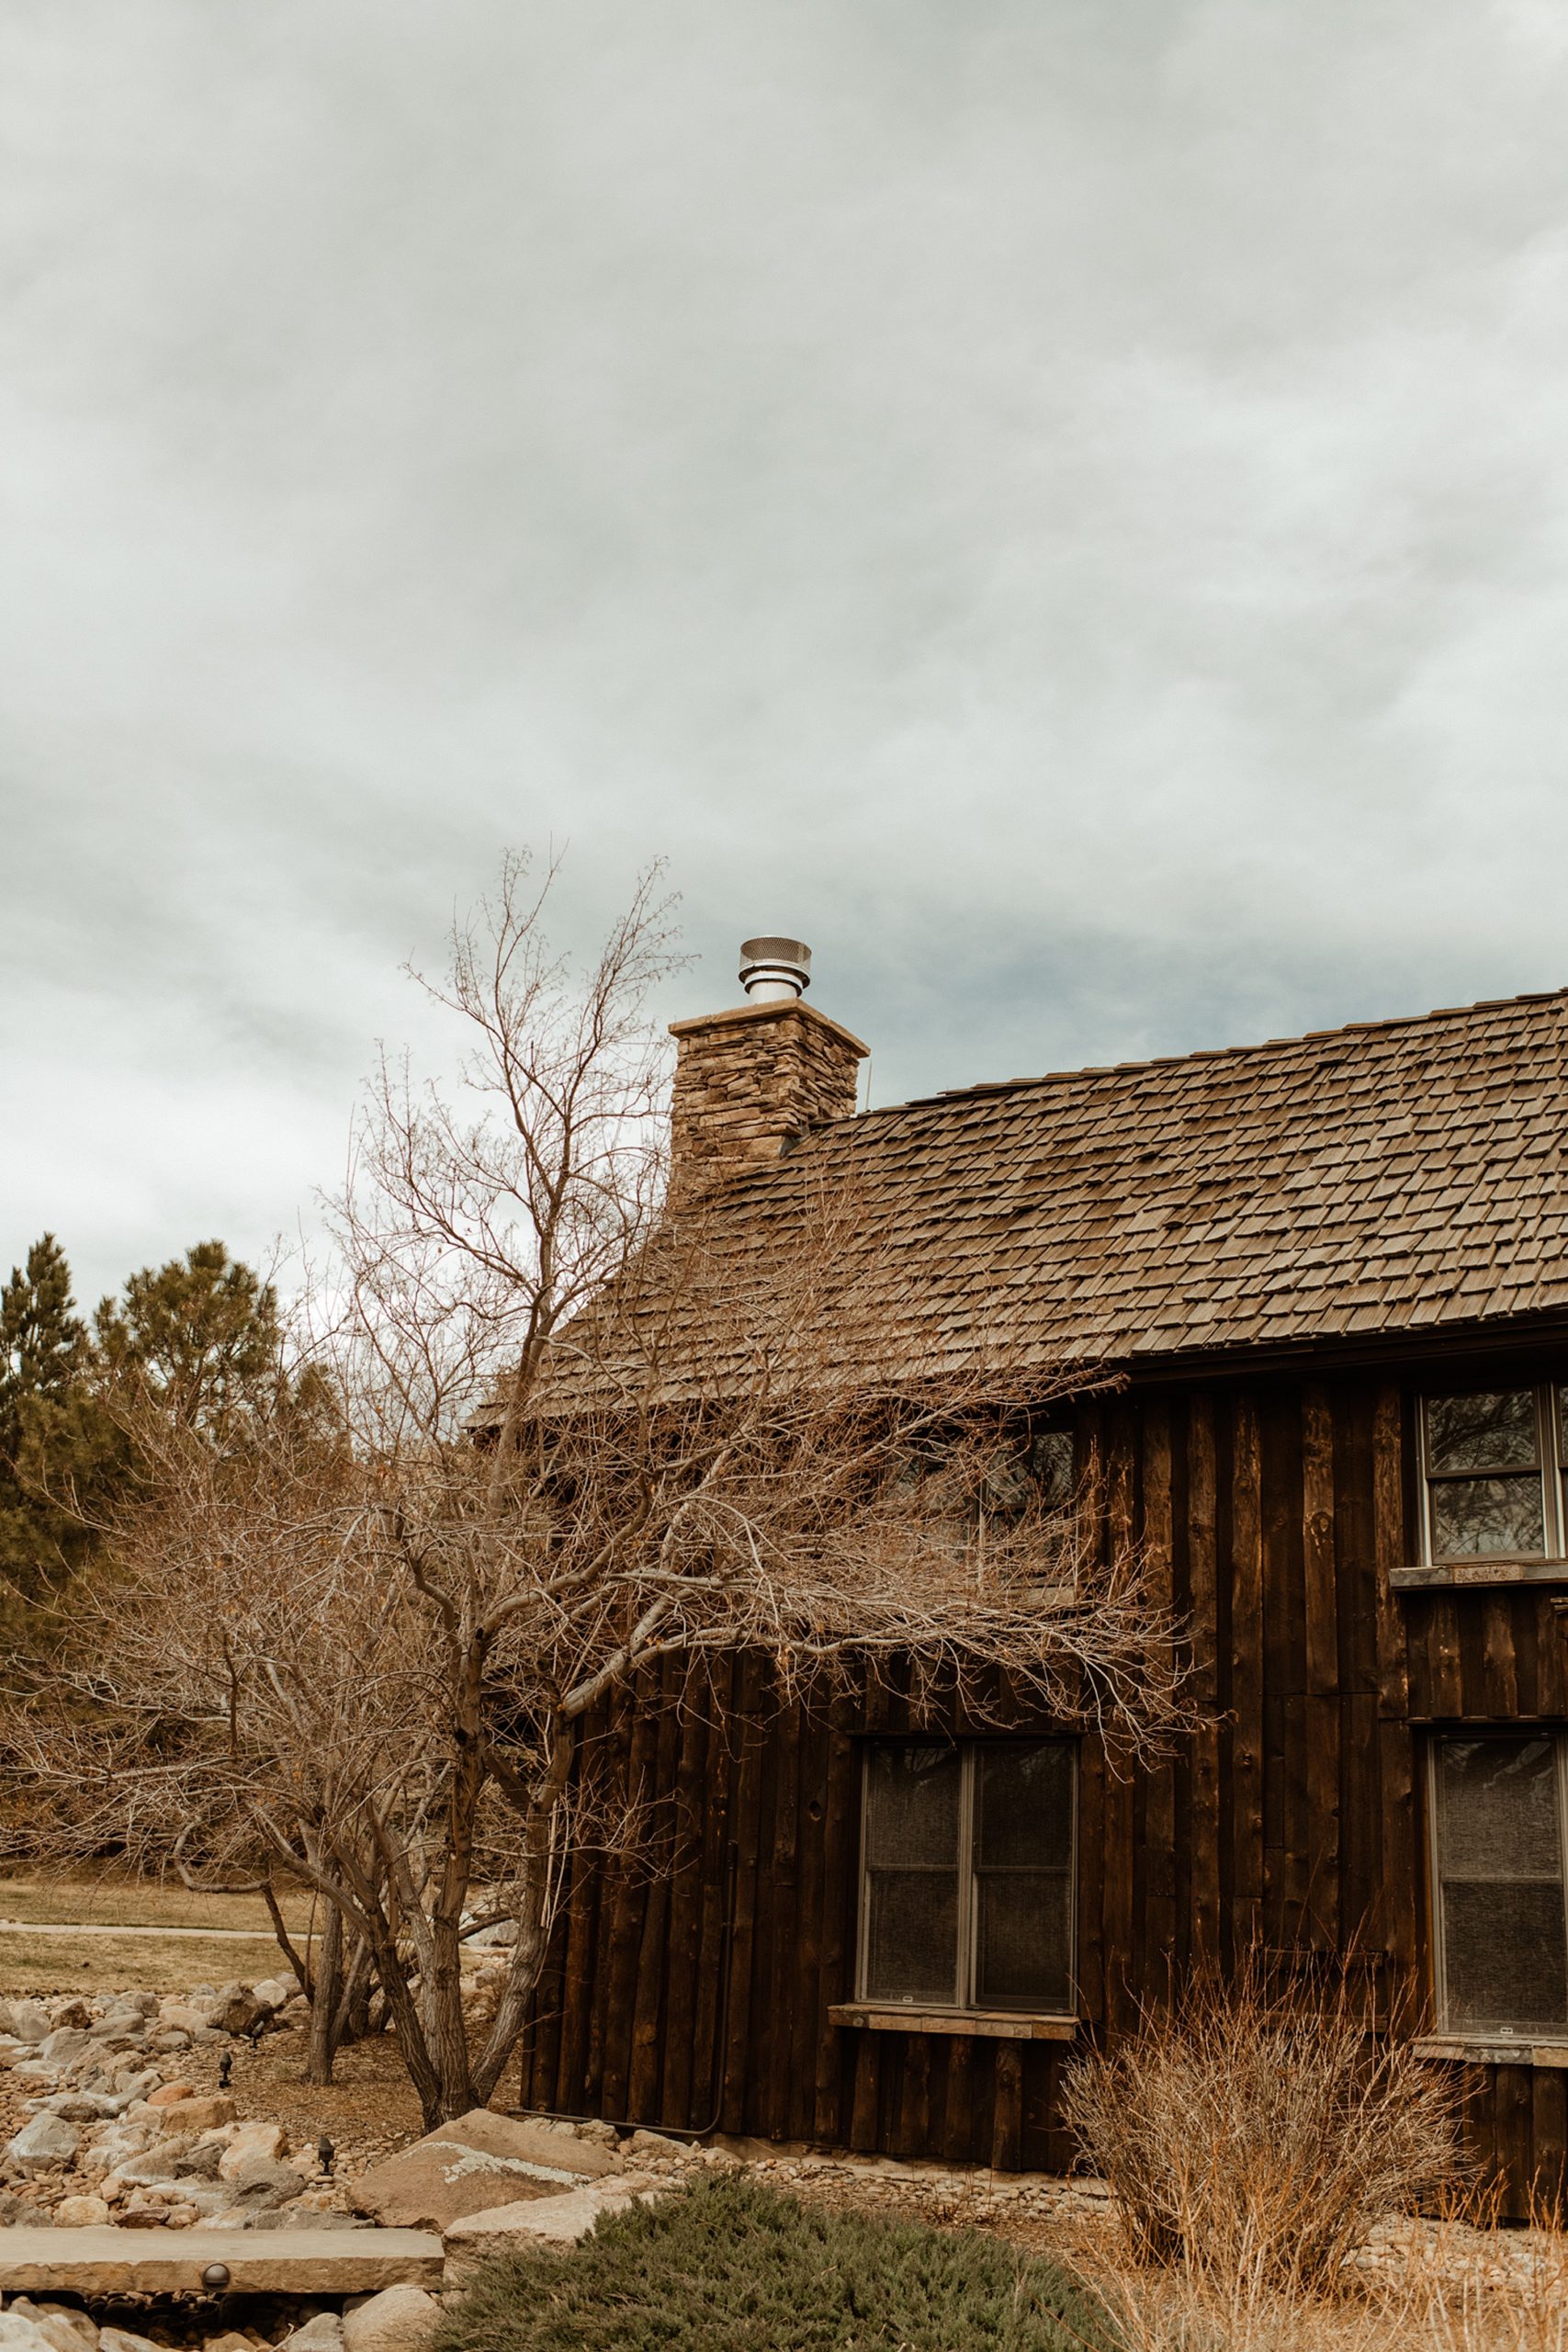 The exterior of the Colorado Room at Spruce Mountain Ranch in the springtime